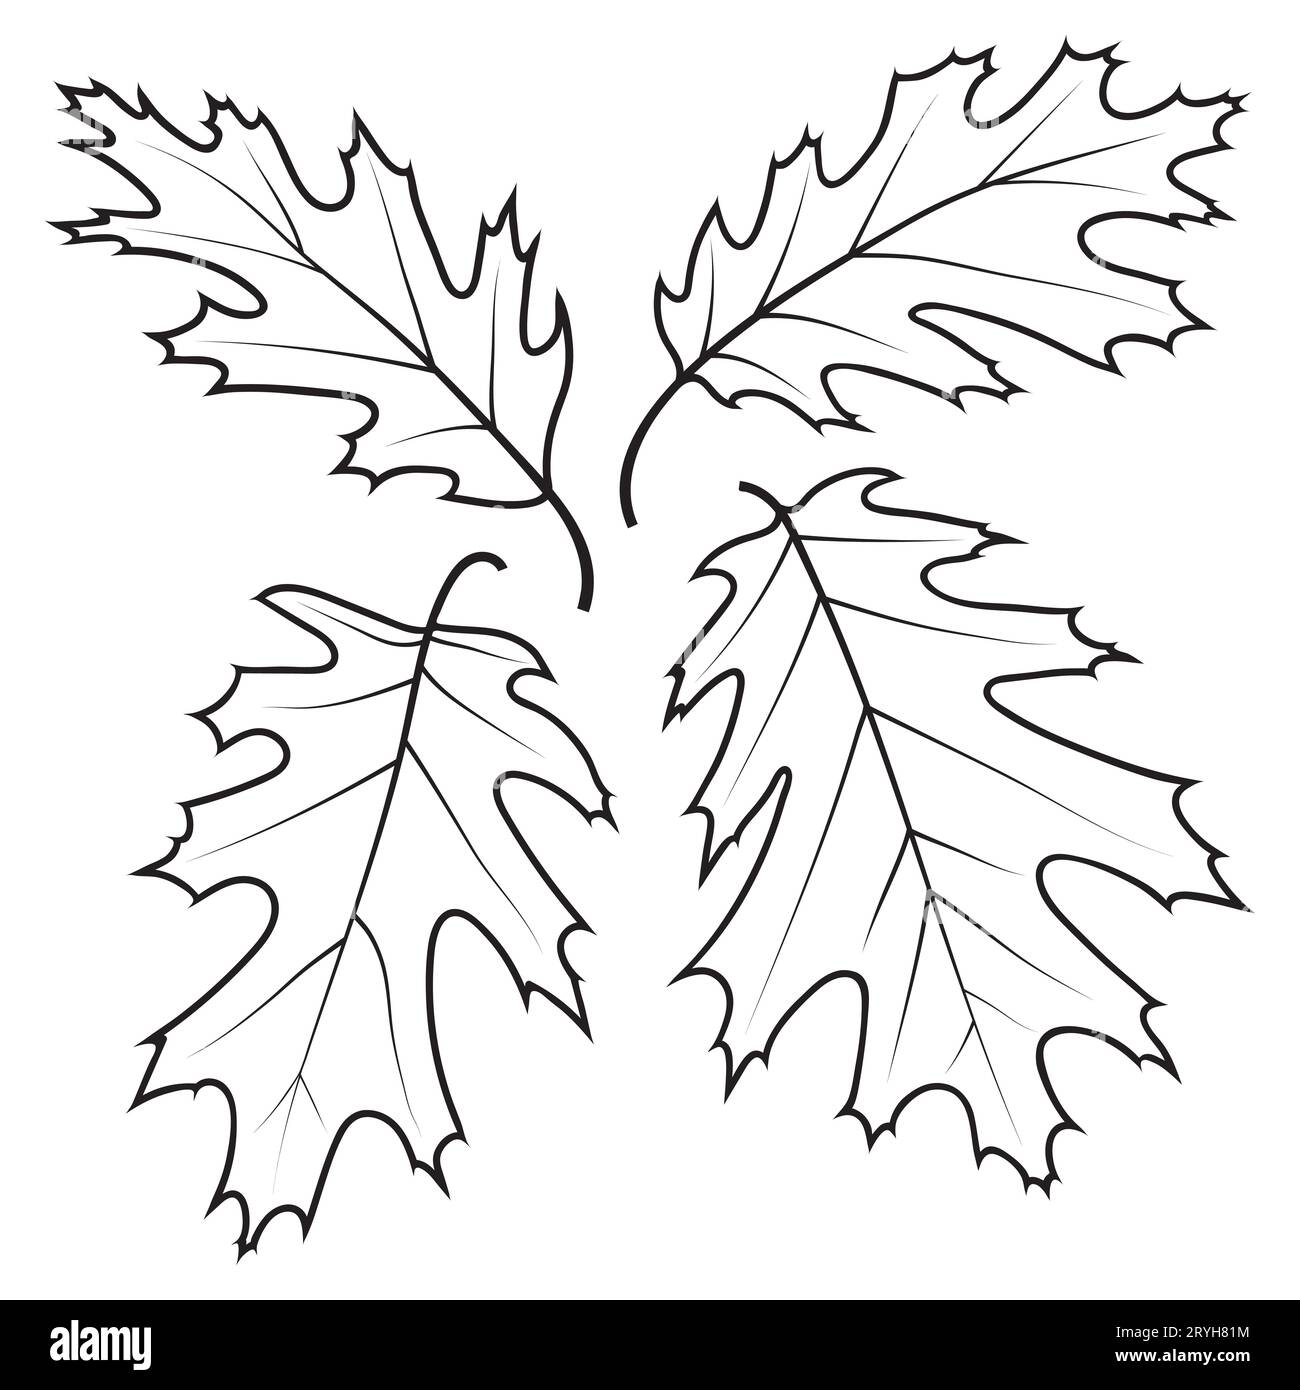 Northern Red Oak tree leaves, vector illustration isolated on white background. Oak leaf outlines, coloring page. Stock Vector